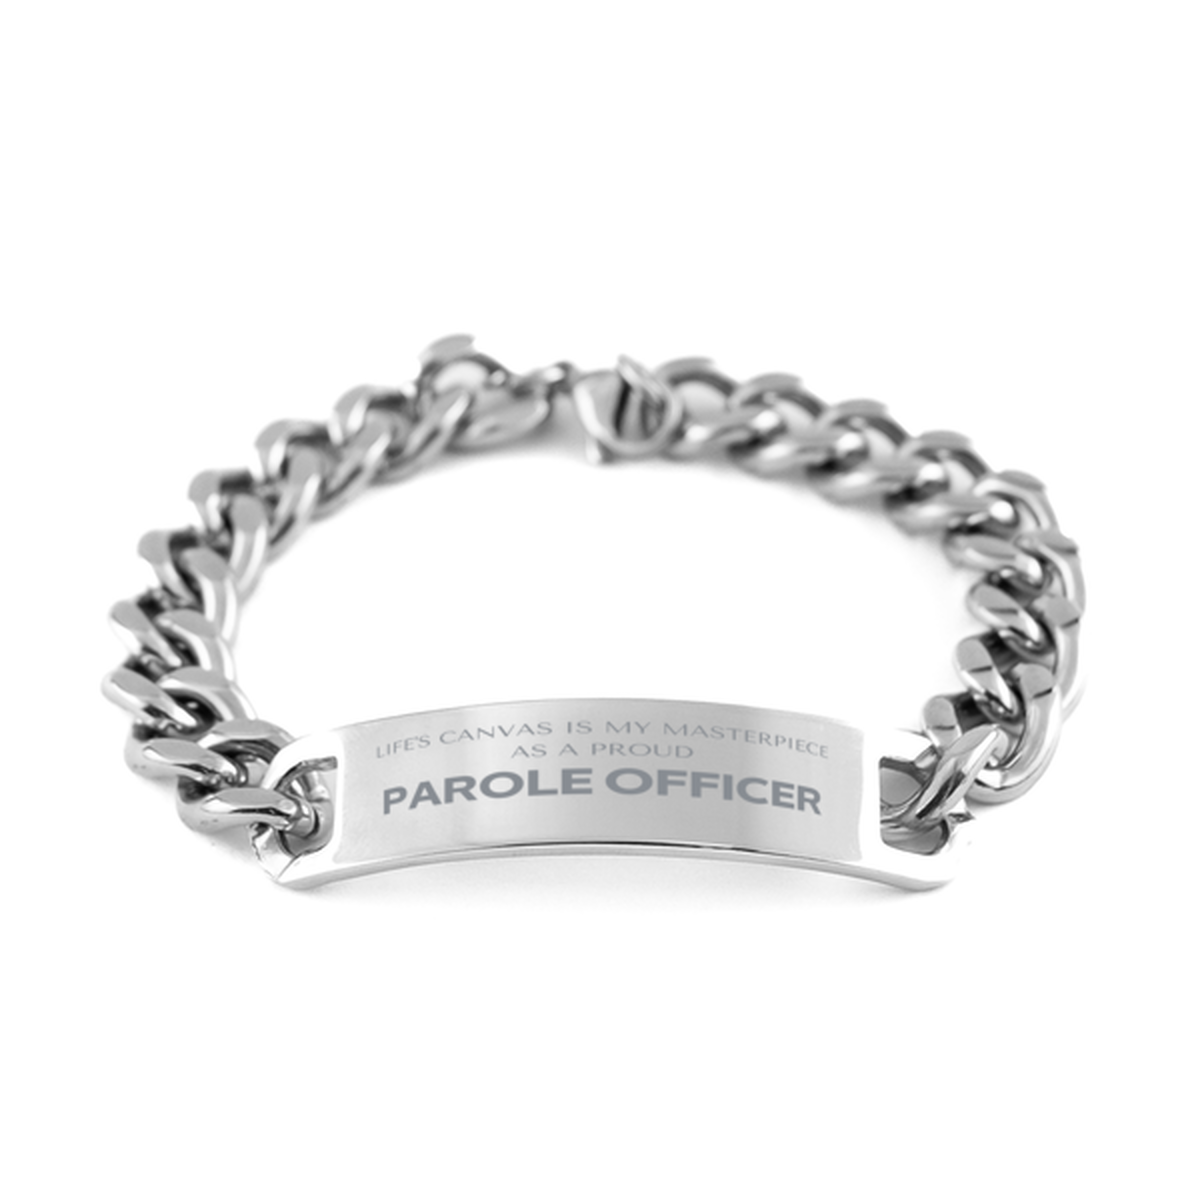 Proud Parole Officer Gifts, Life's canvas is my masterpiece, Epic Birthday Christmas Unique Cuban Chain Stainless Steel Bracelet For Parole Officer, Coworkers, Men, Women, Friends